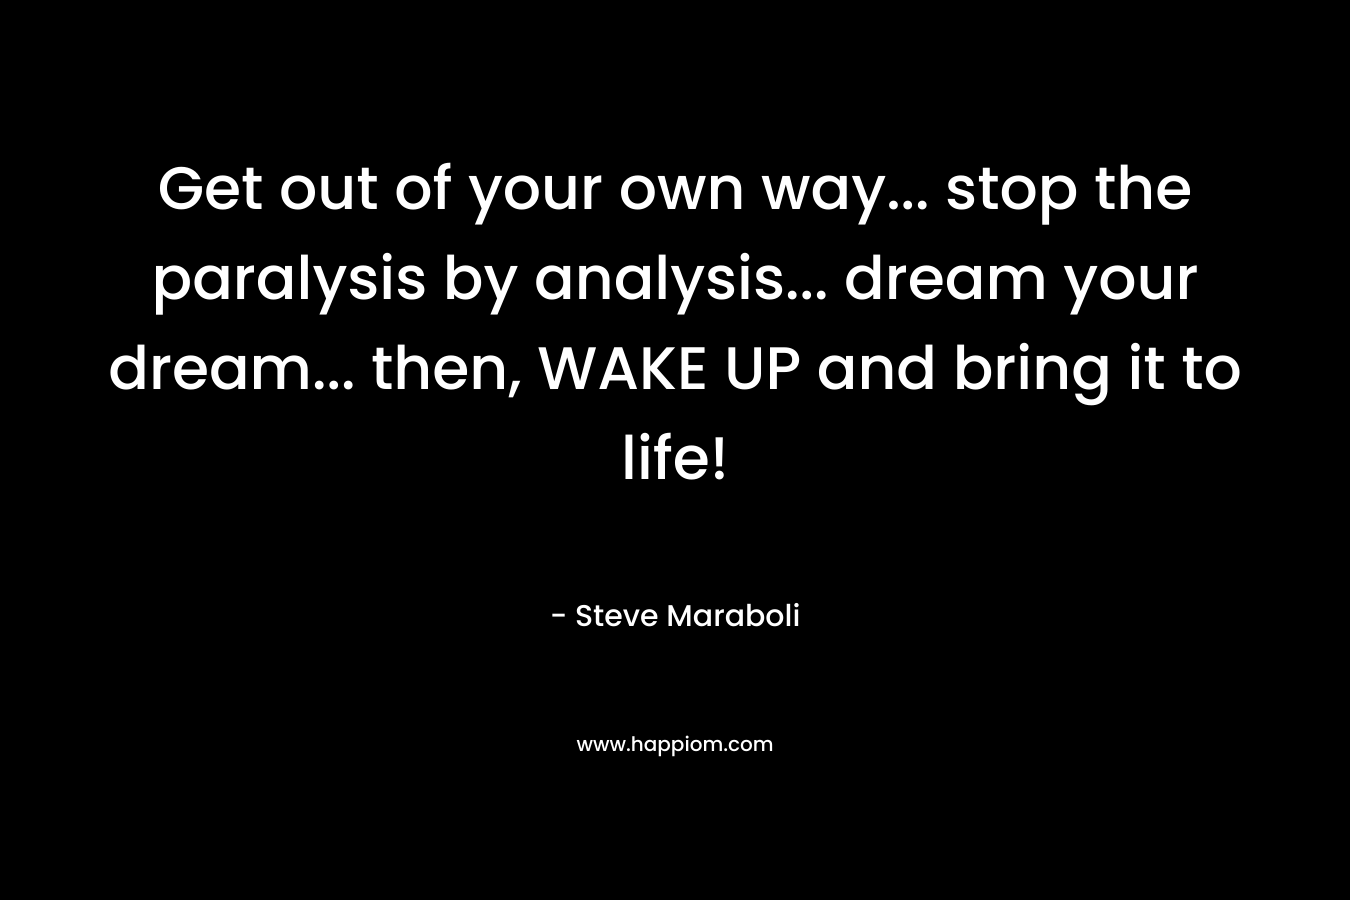 Get out of your own way… stop the paralysis by analysis… dream your dream… then, WAKE UP and bring it to life! – Steve Maraboli